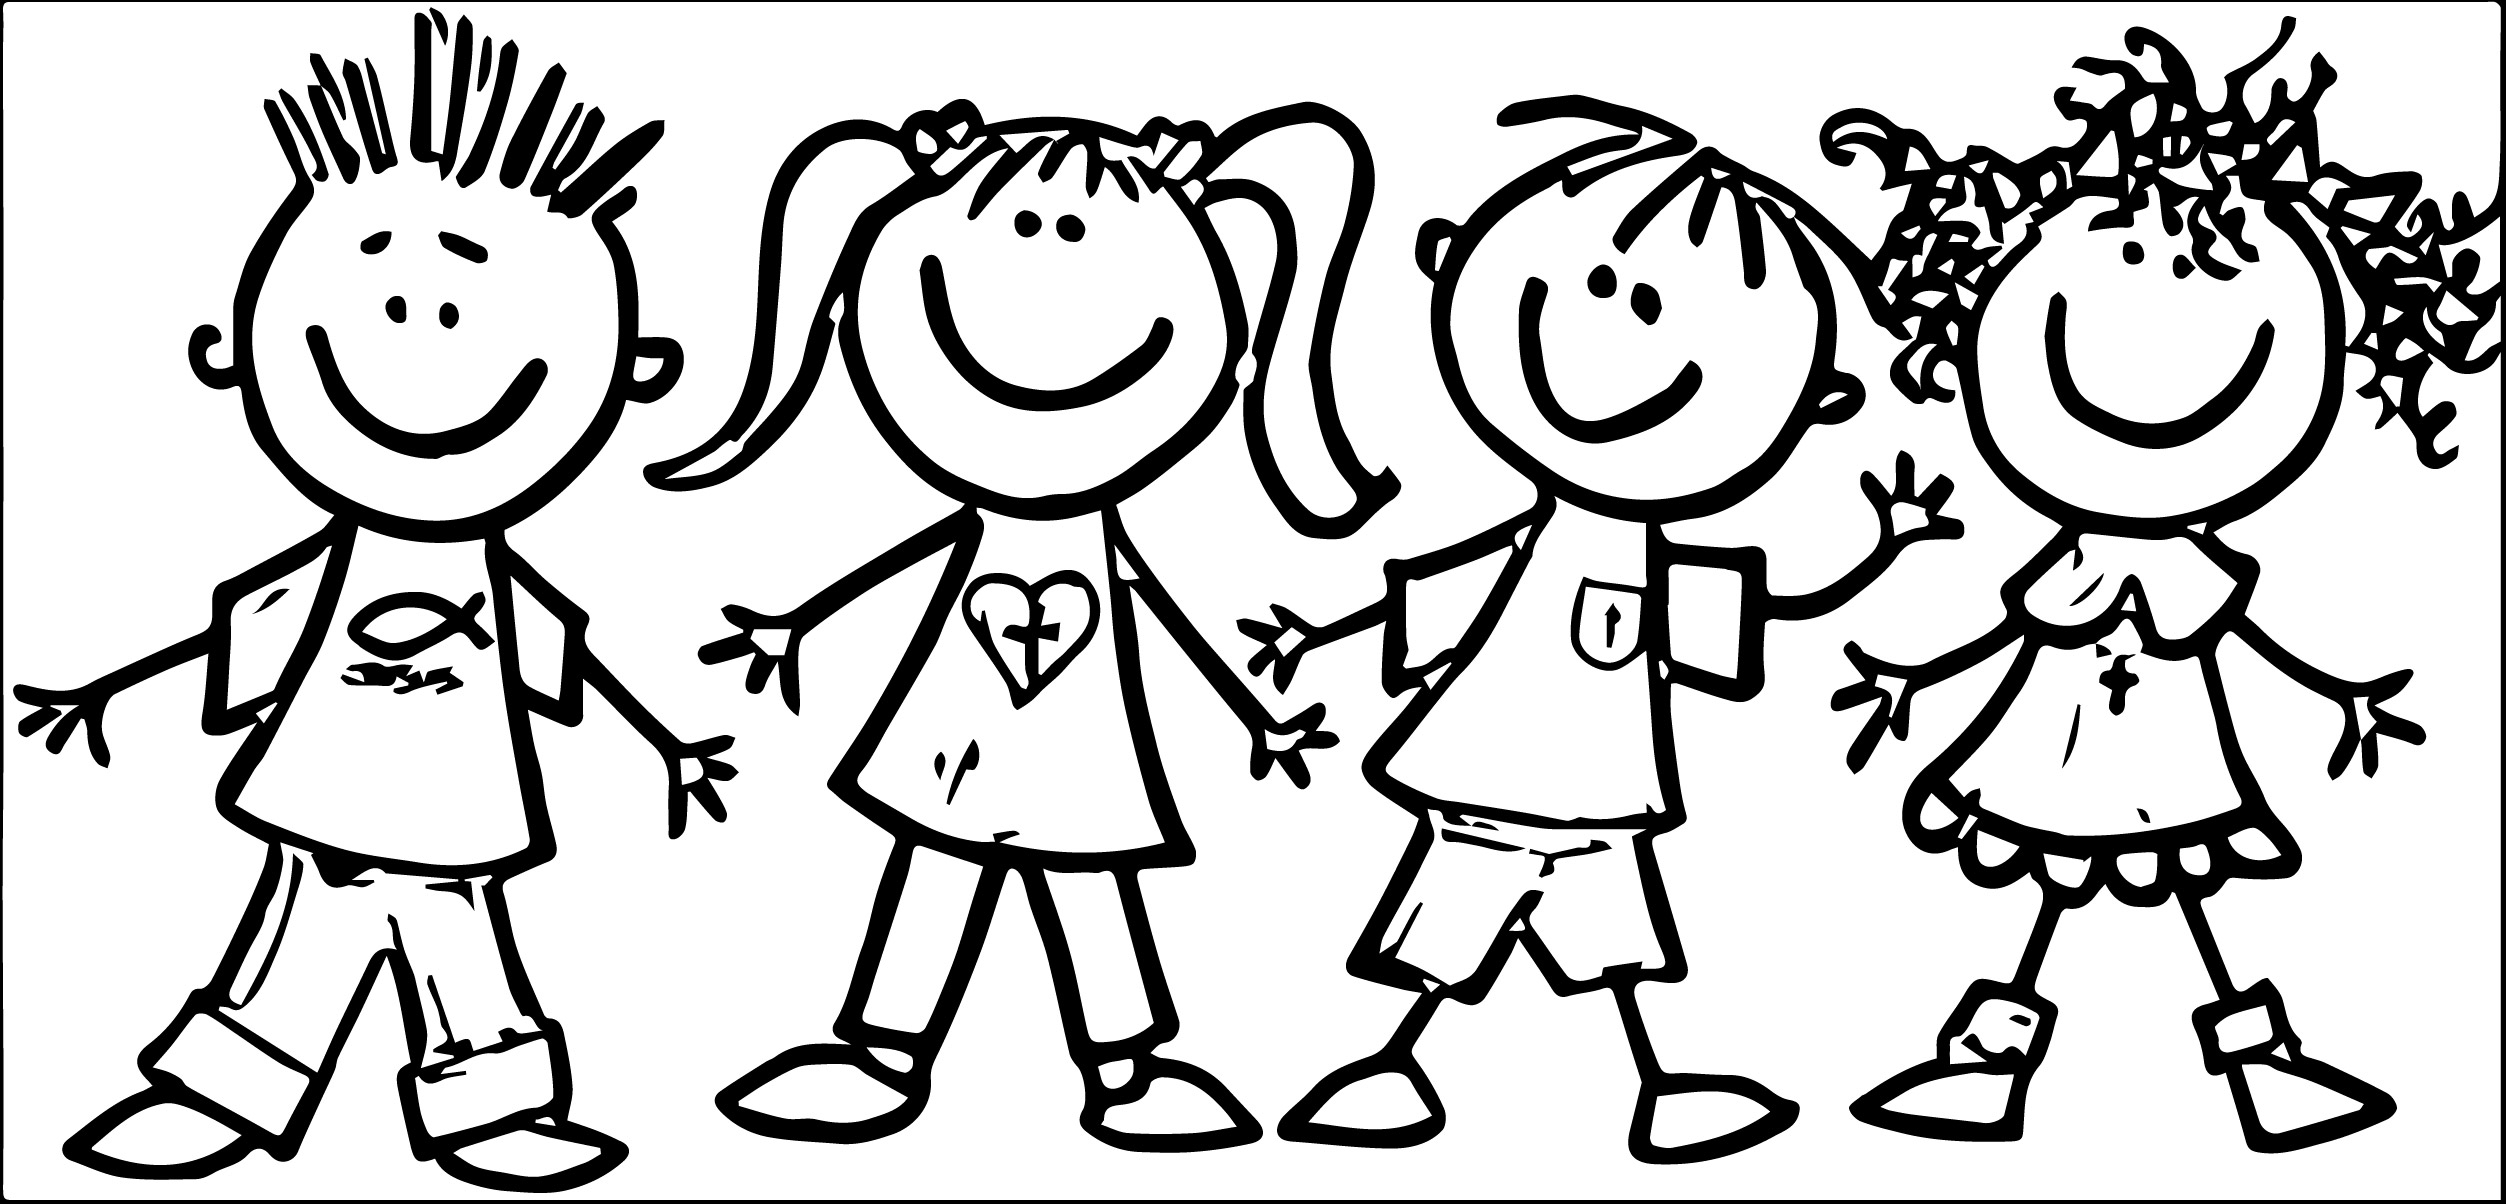 School group clipart black and white